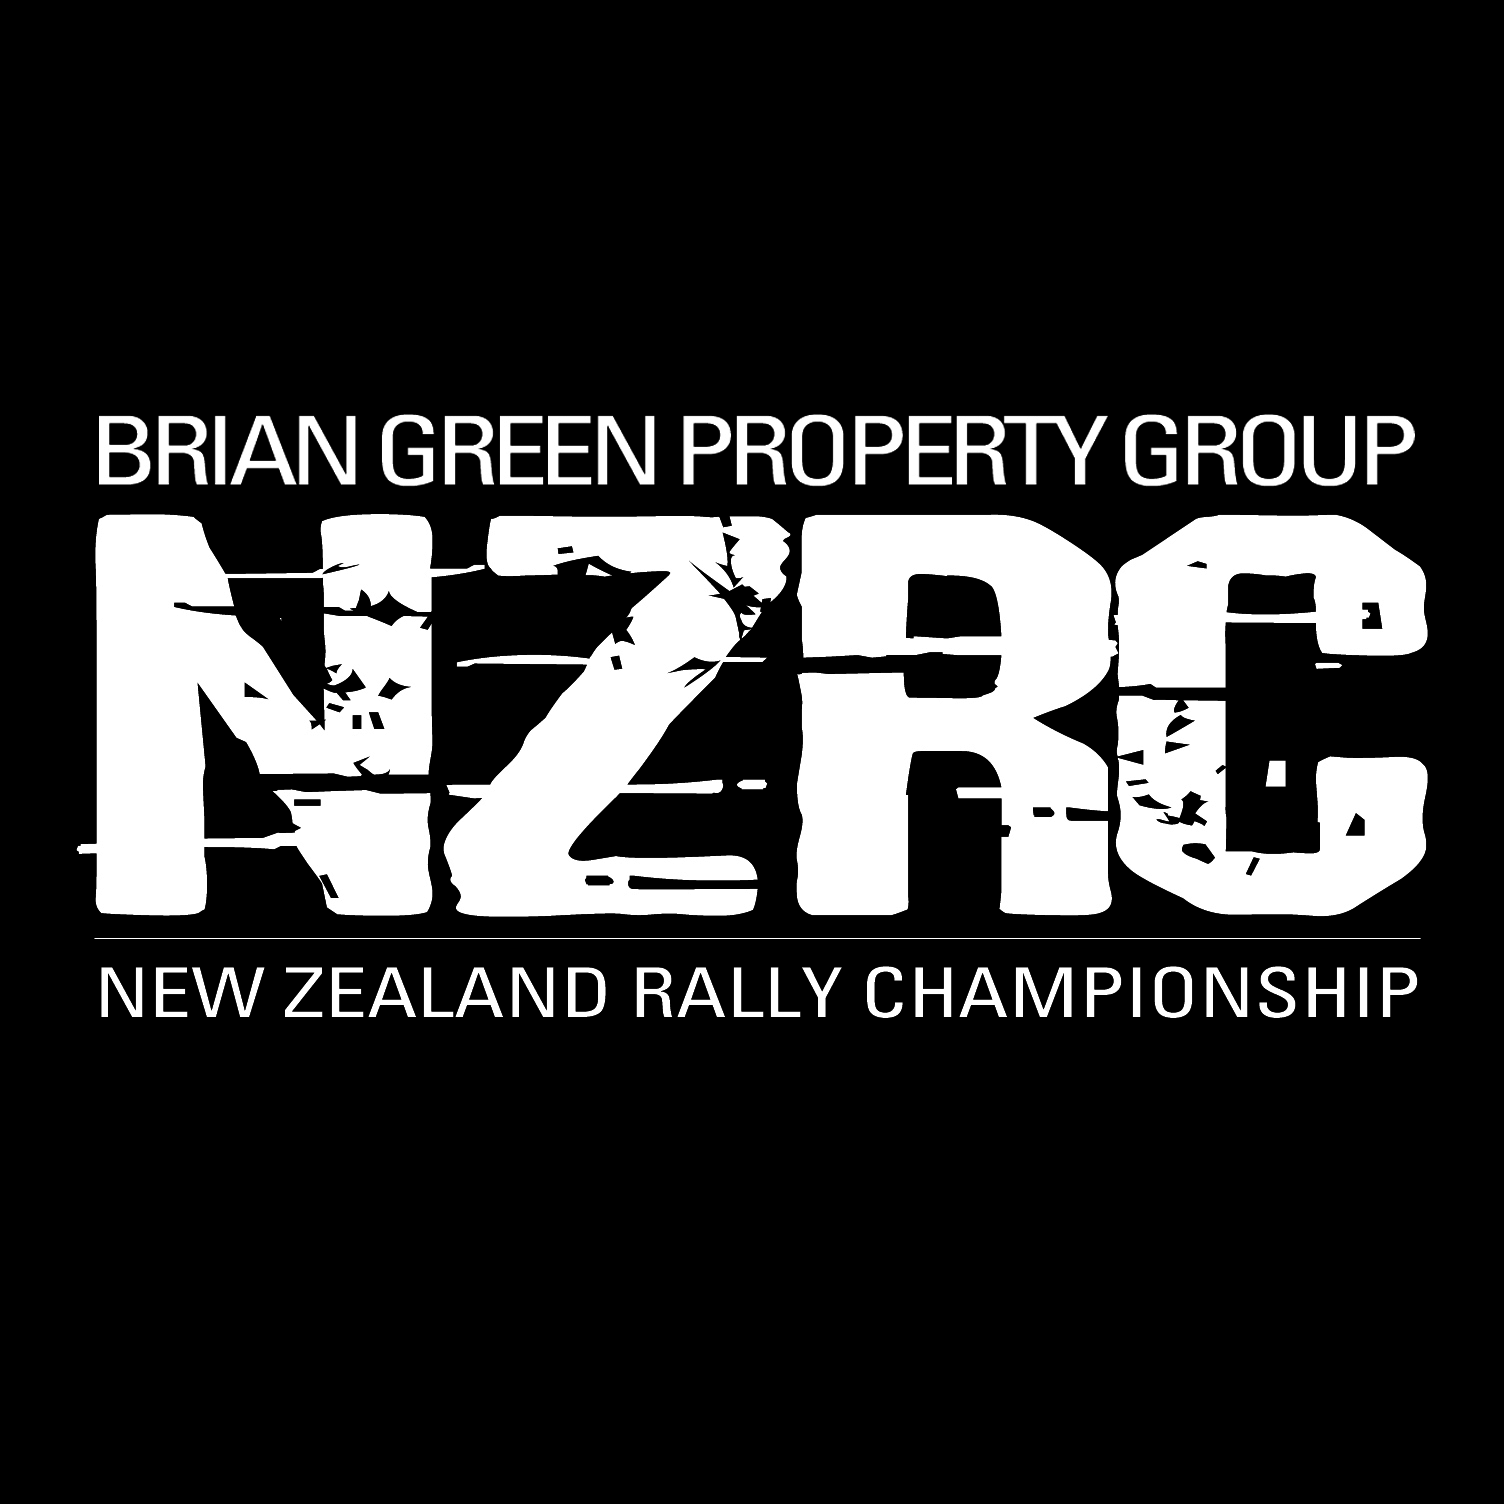 What’s new with the NZRC in 2019? | :: Brian Green Property Group New Zealand Rally Championship ::